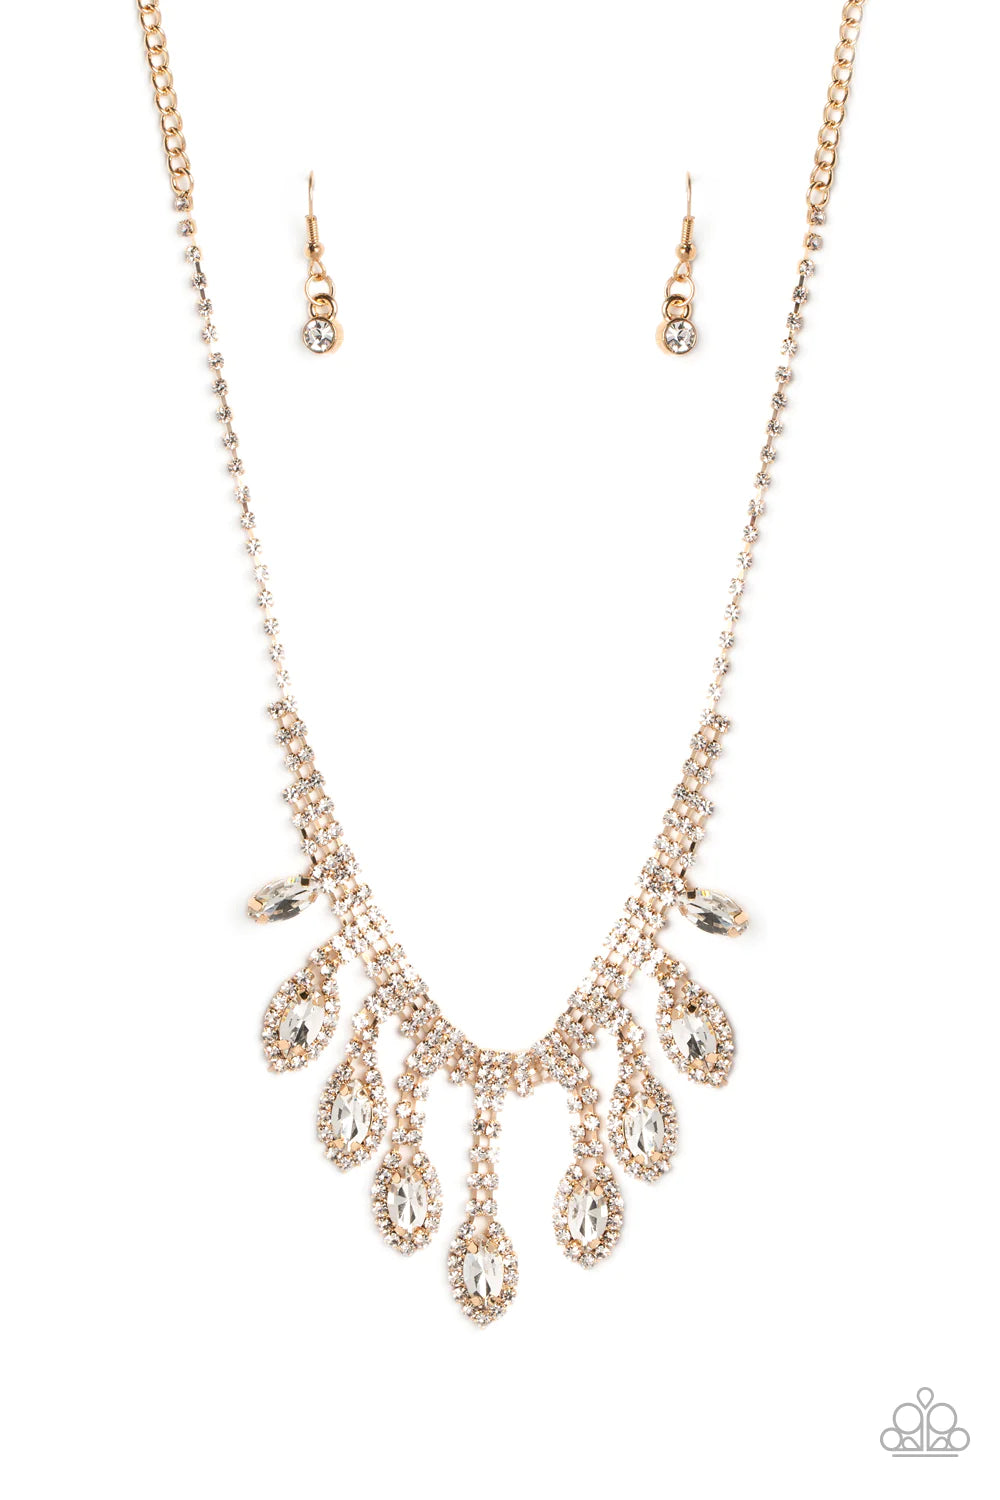 REIGNING Romance - Gold Necklace